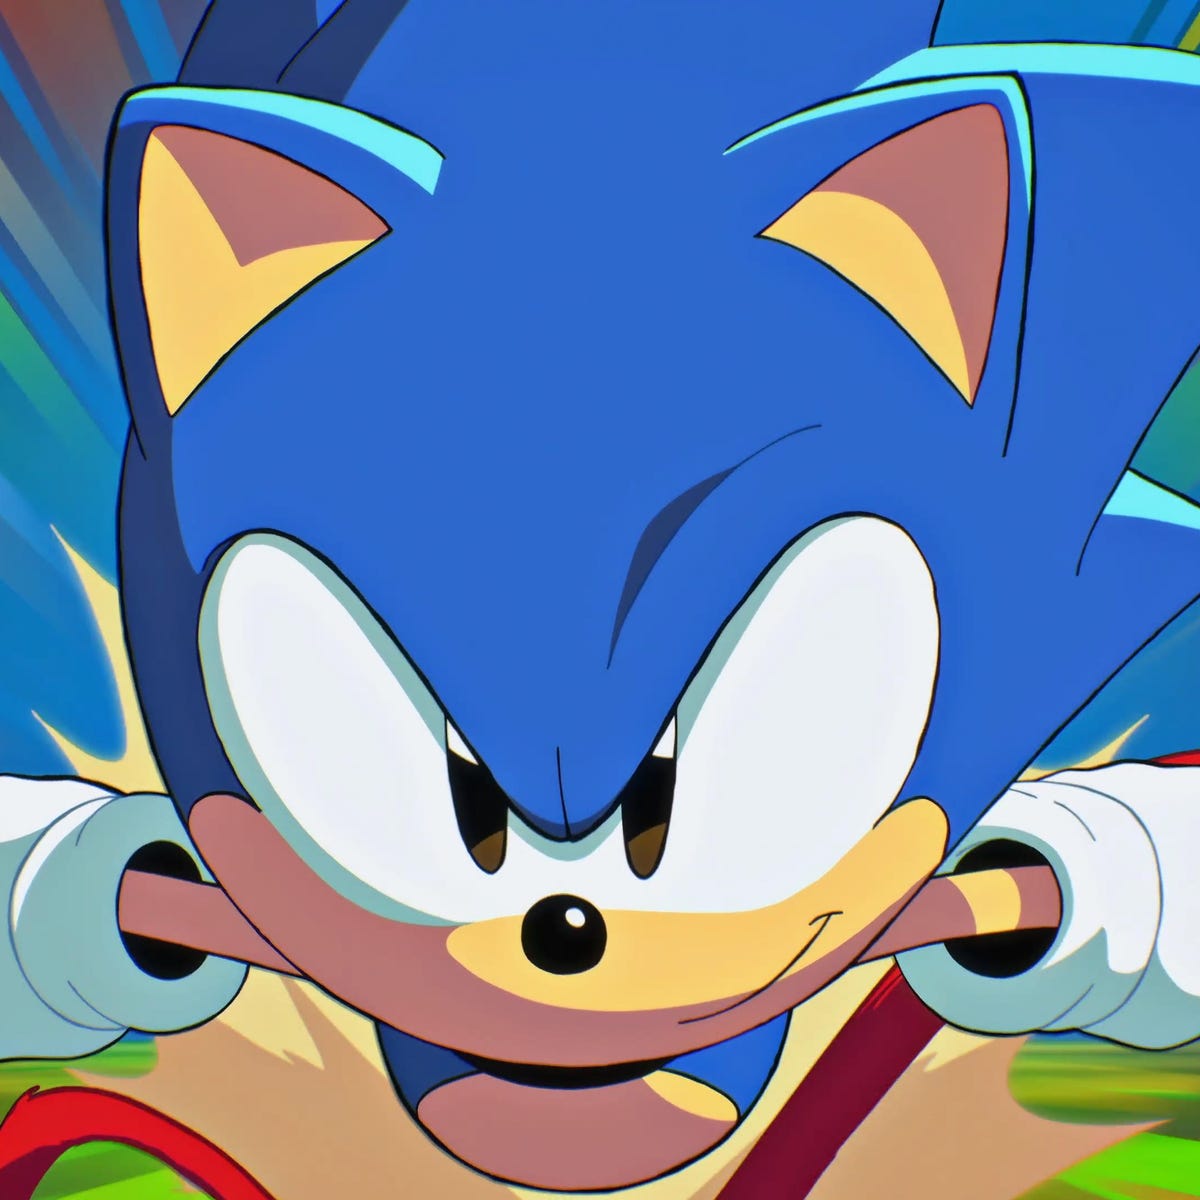 Sonic Origins Review: Classic Game Collection Put Me in a Better Mood - CNET